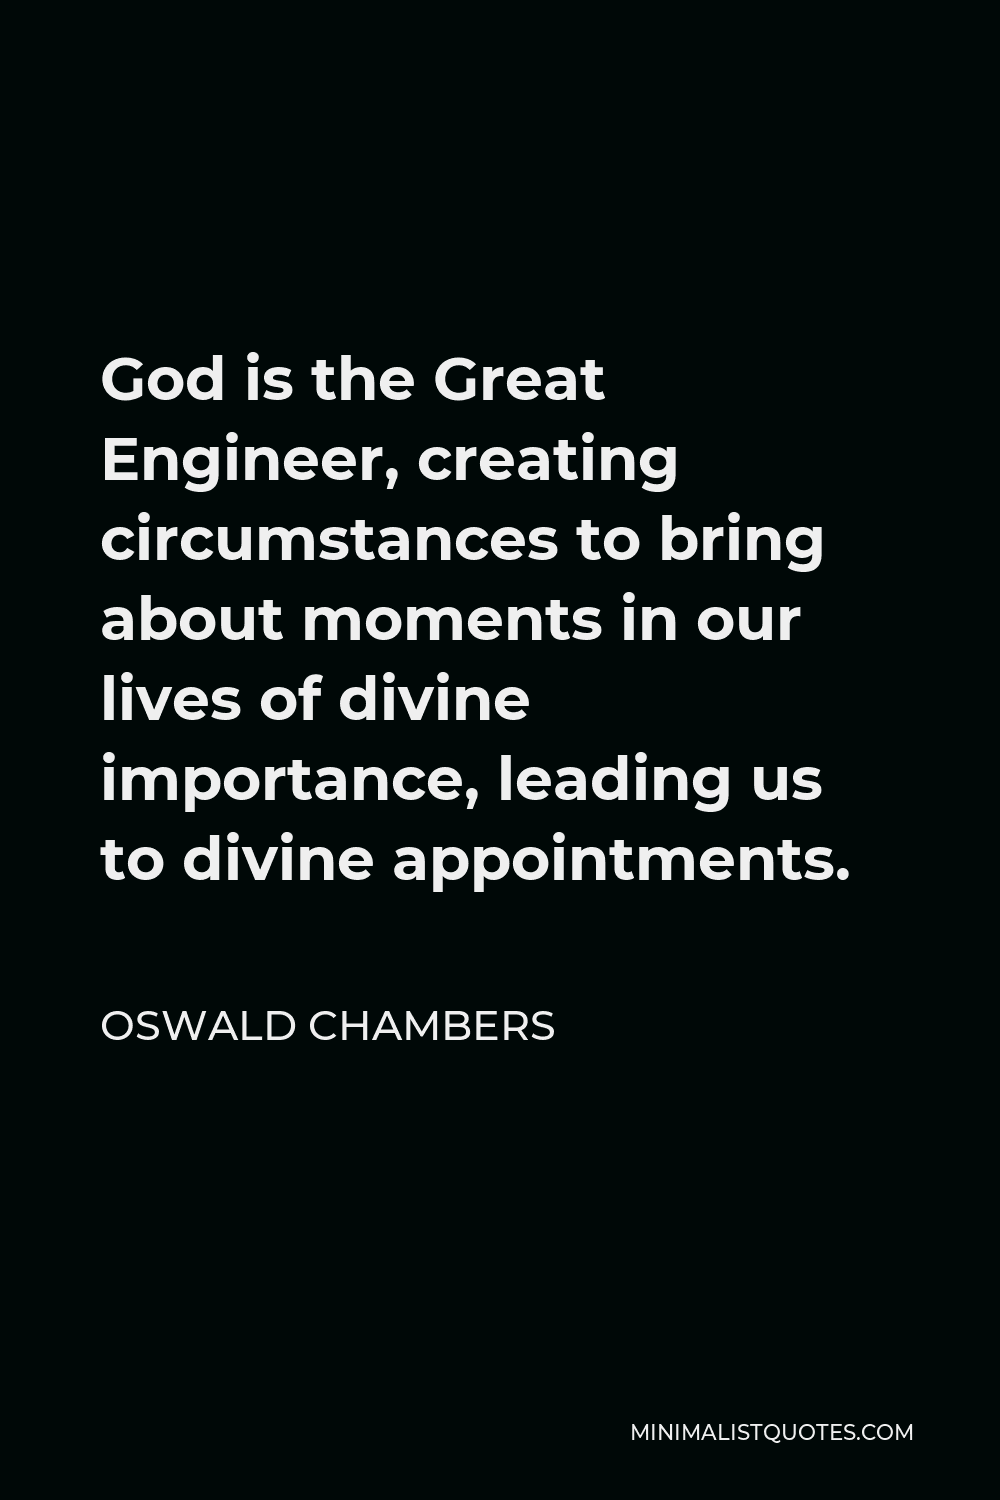 Oswald Chambers Quote - God is the Great Engineer, creating circumstances to bring about moments in our lives of divine importance, leading us to divine appointments.